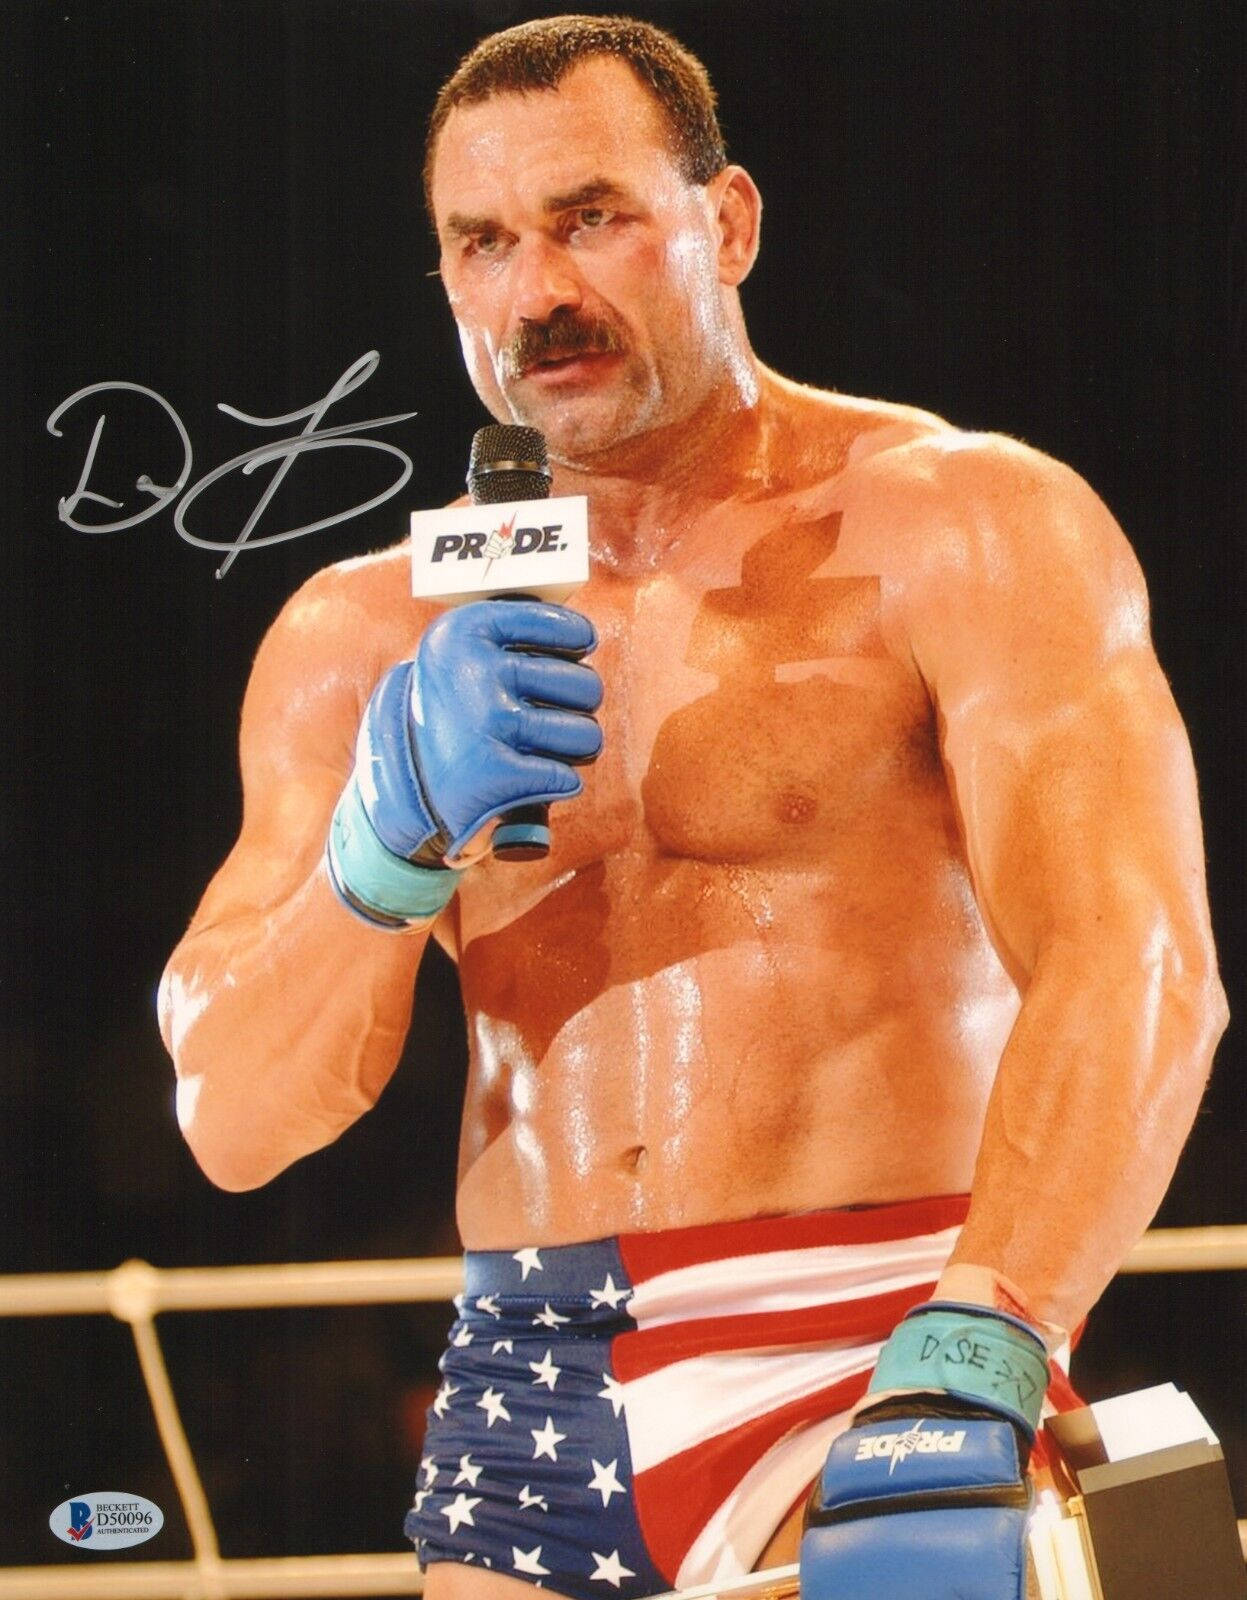 Signed Photograph Of Don Frye Wallpaper